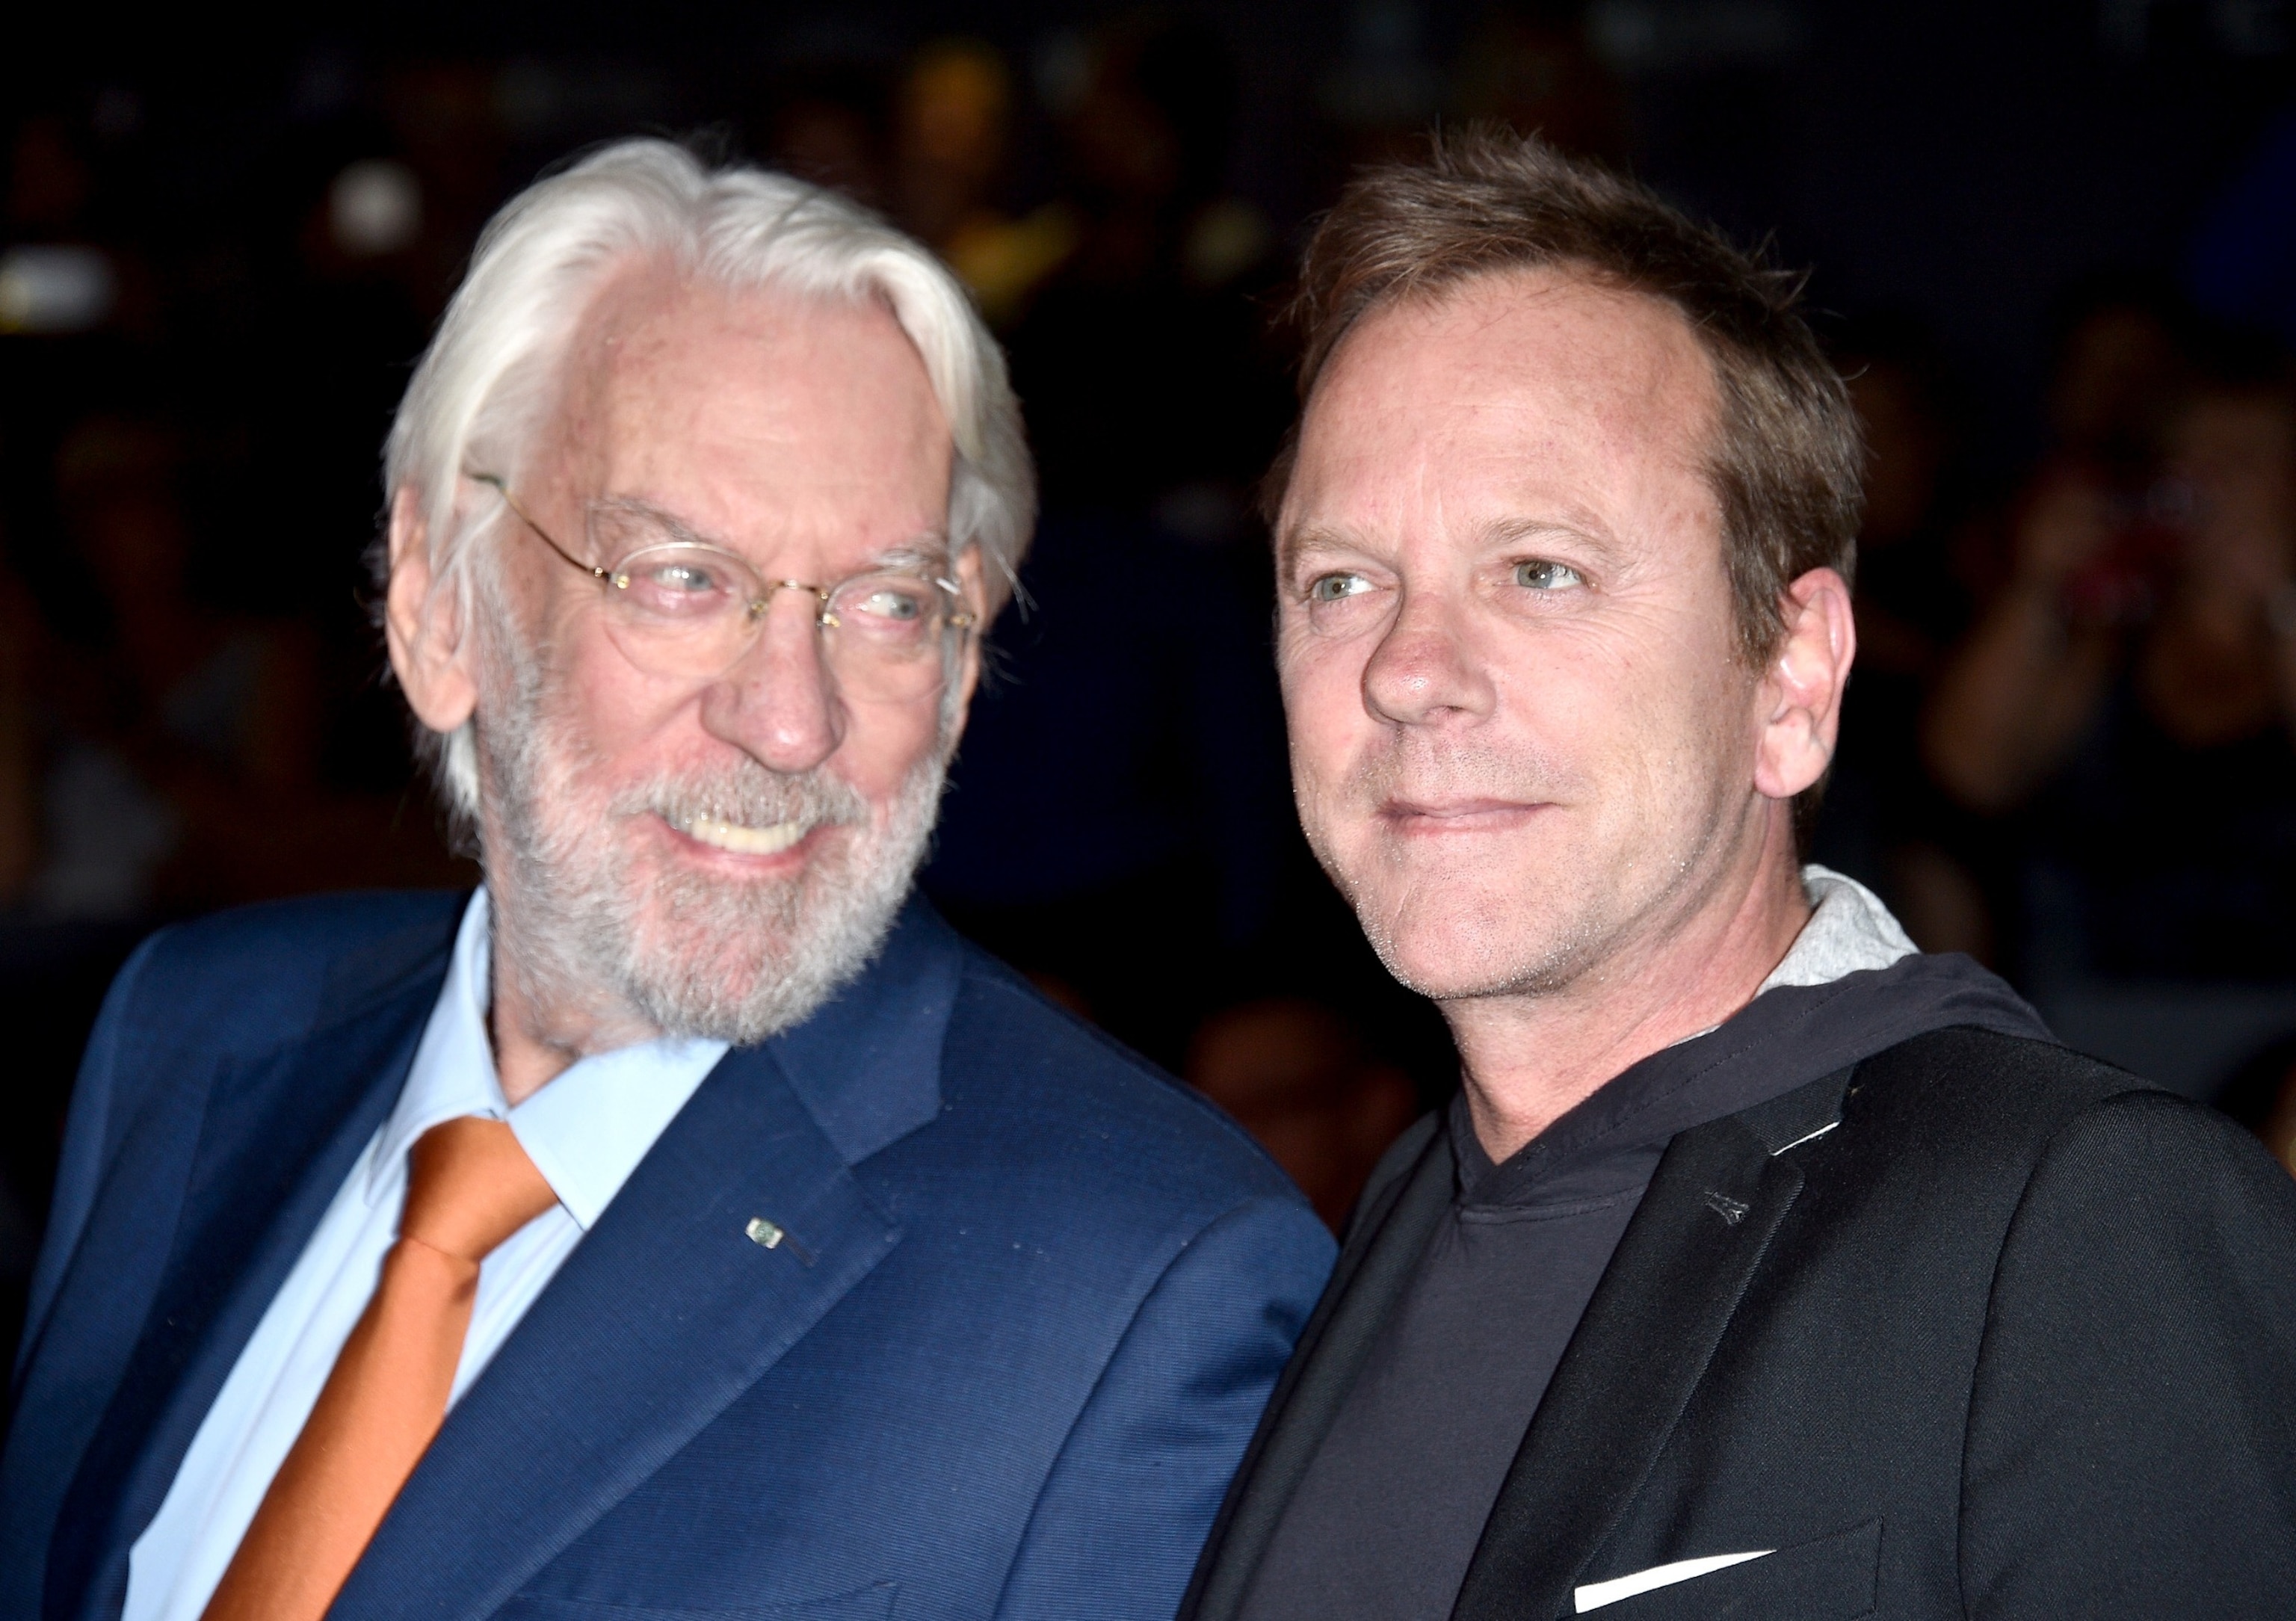 PHOTO: Donald Sutherland (L) and Kiefer Sutherland attend the "Forsaken" premiere during the 2015 Toronto International Film Festival at Roy Thomson Hall on September 16, 2015 in Toronto, Canada.